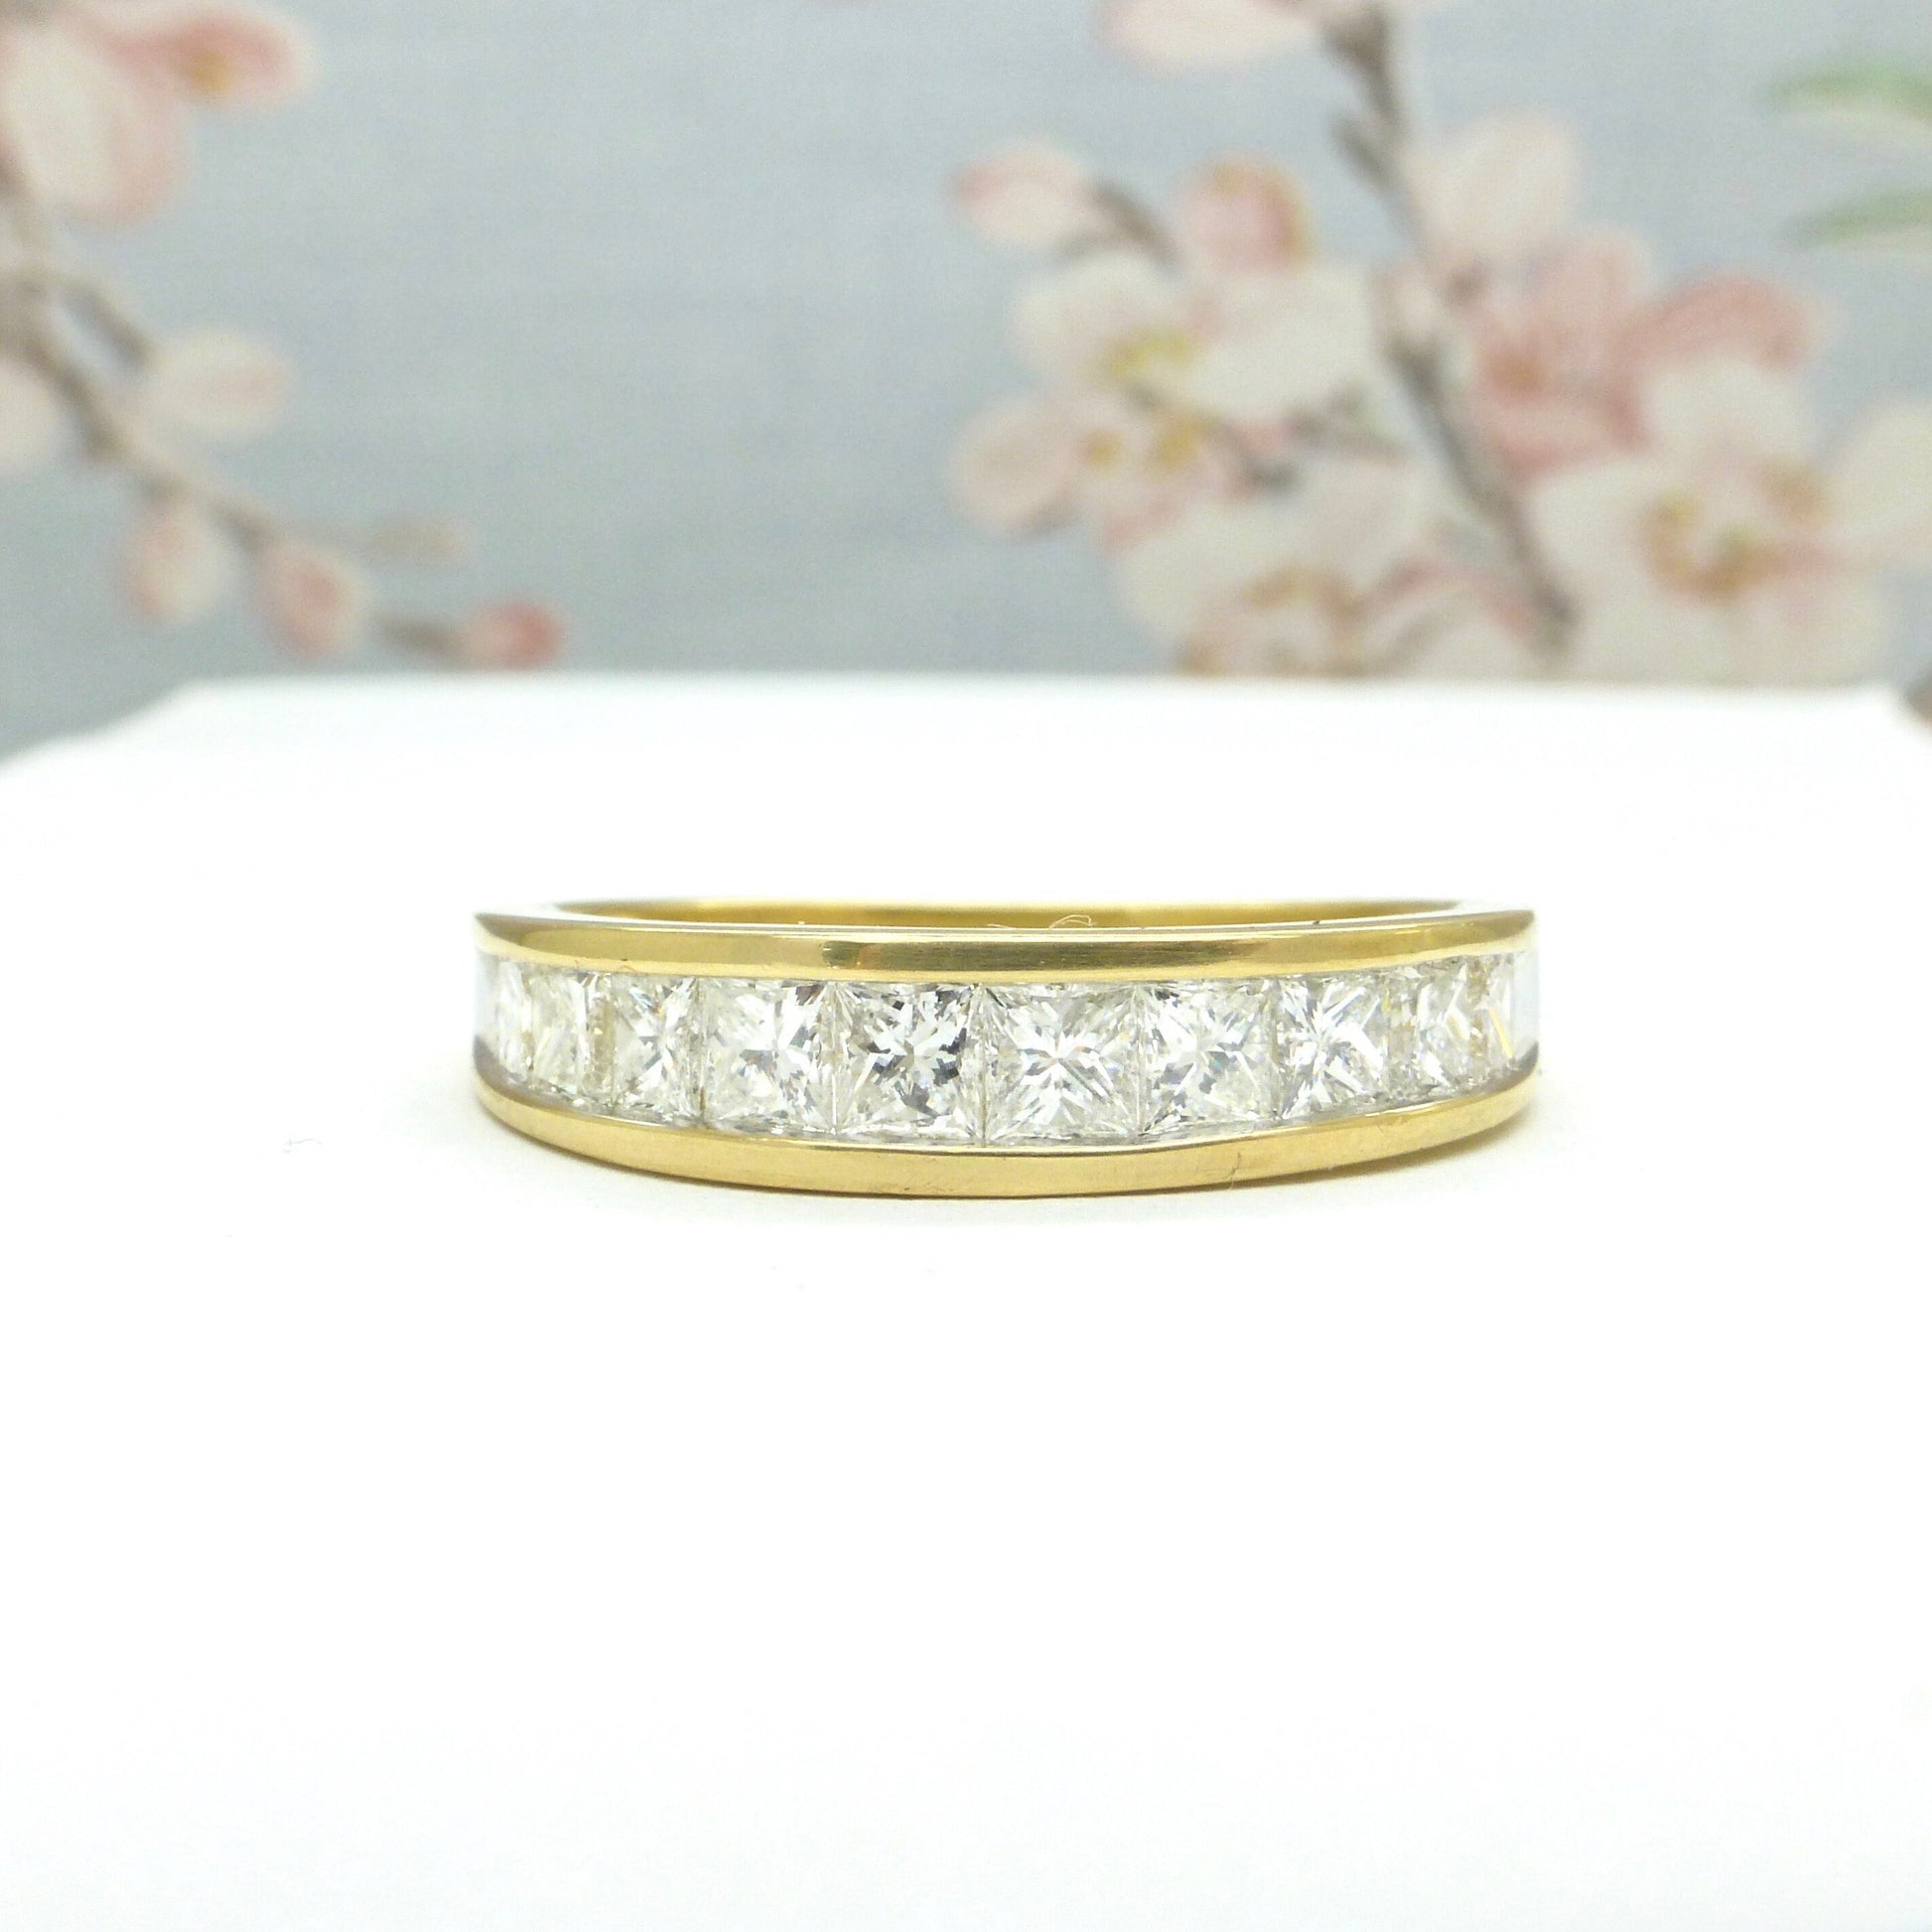 Vintage 18ct gold channel set Princess cut Diamond half eternity ring 1.00ct ~ with independent appraisal